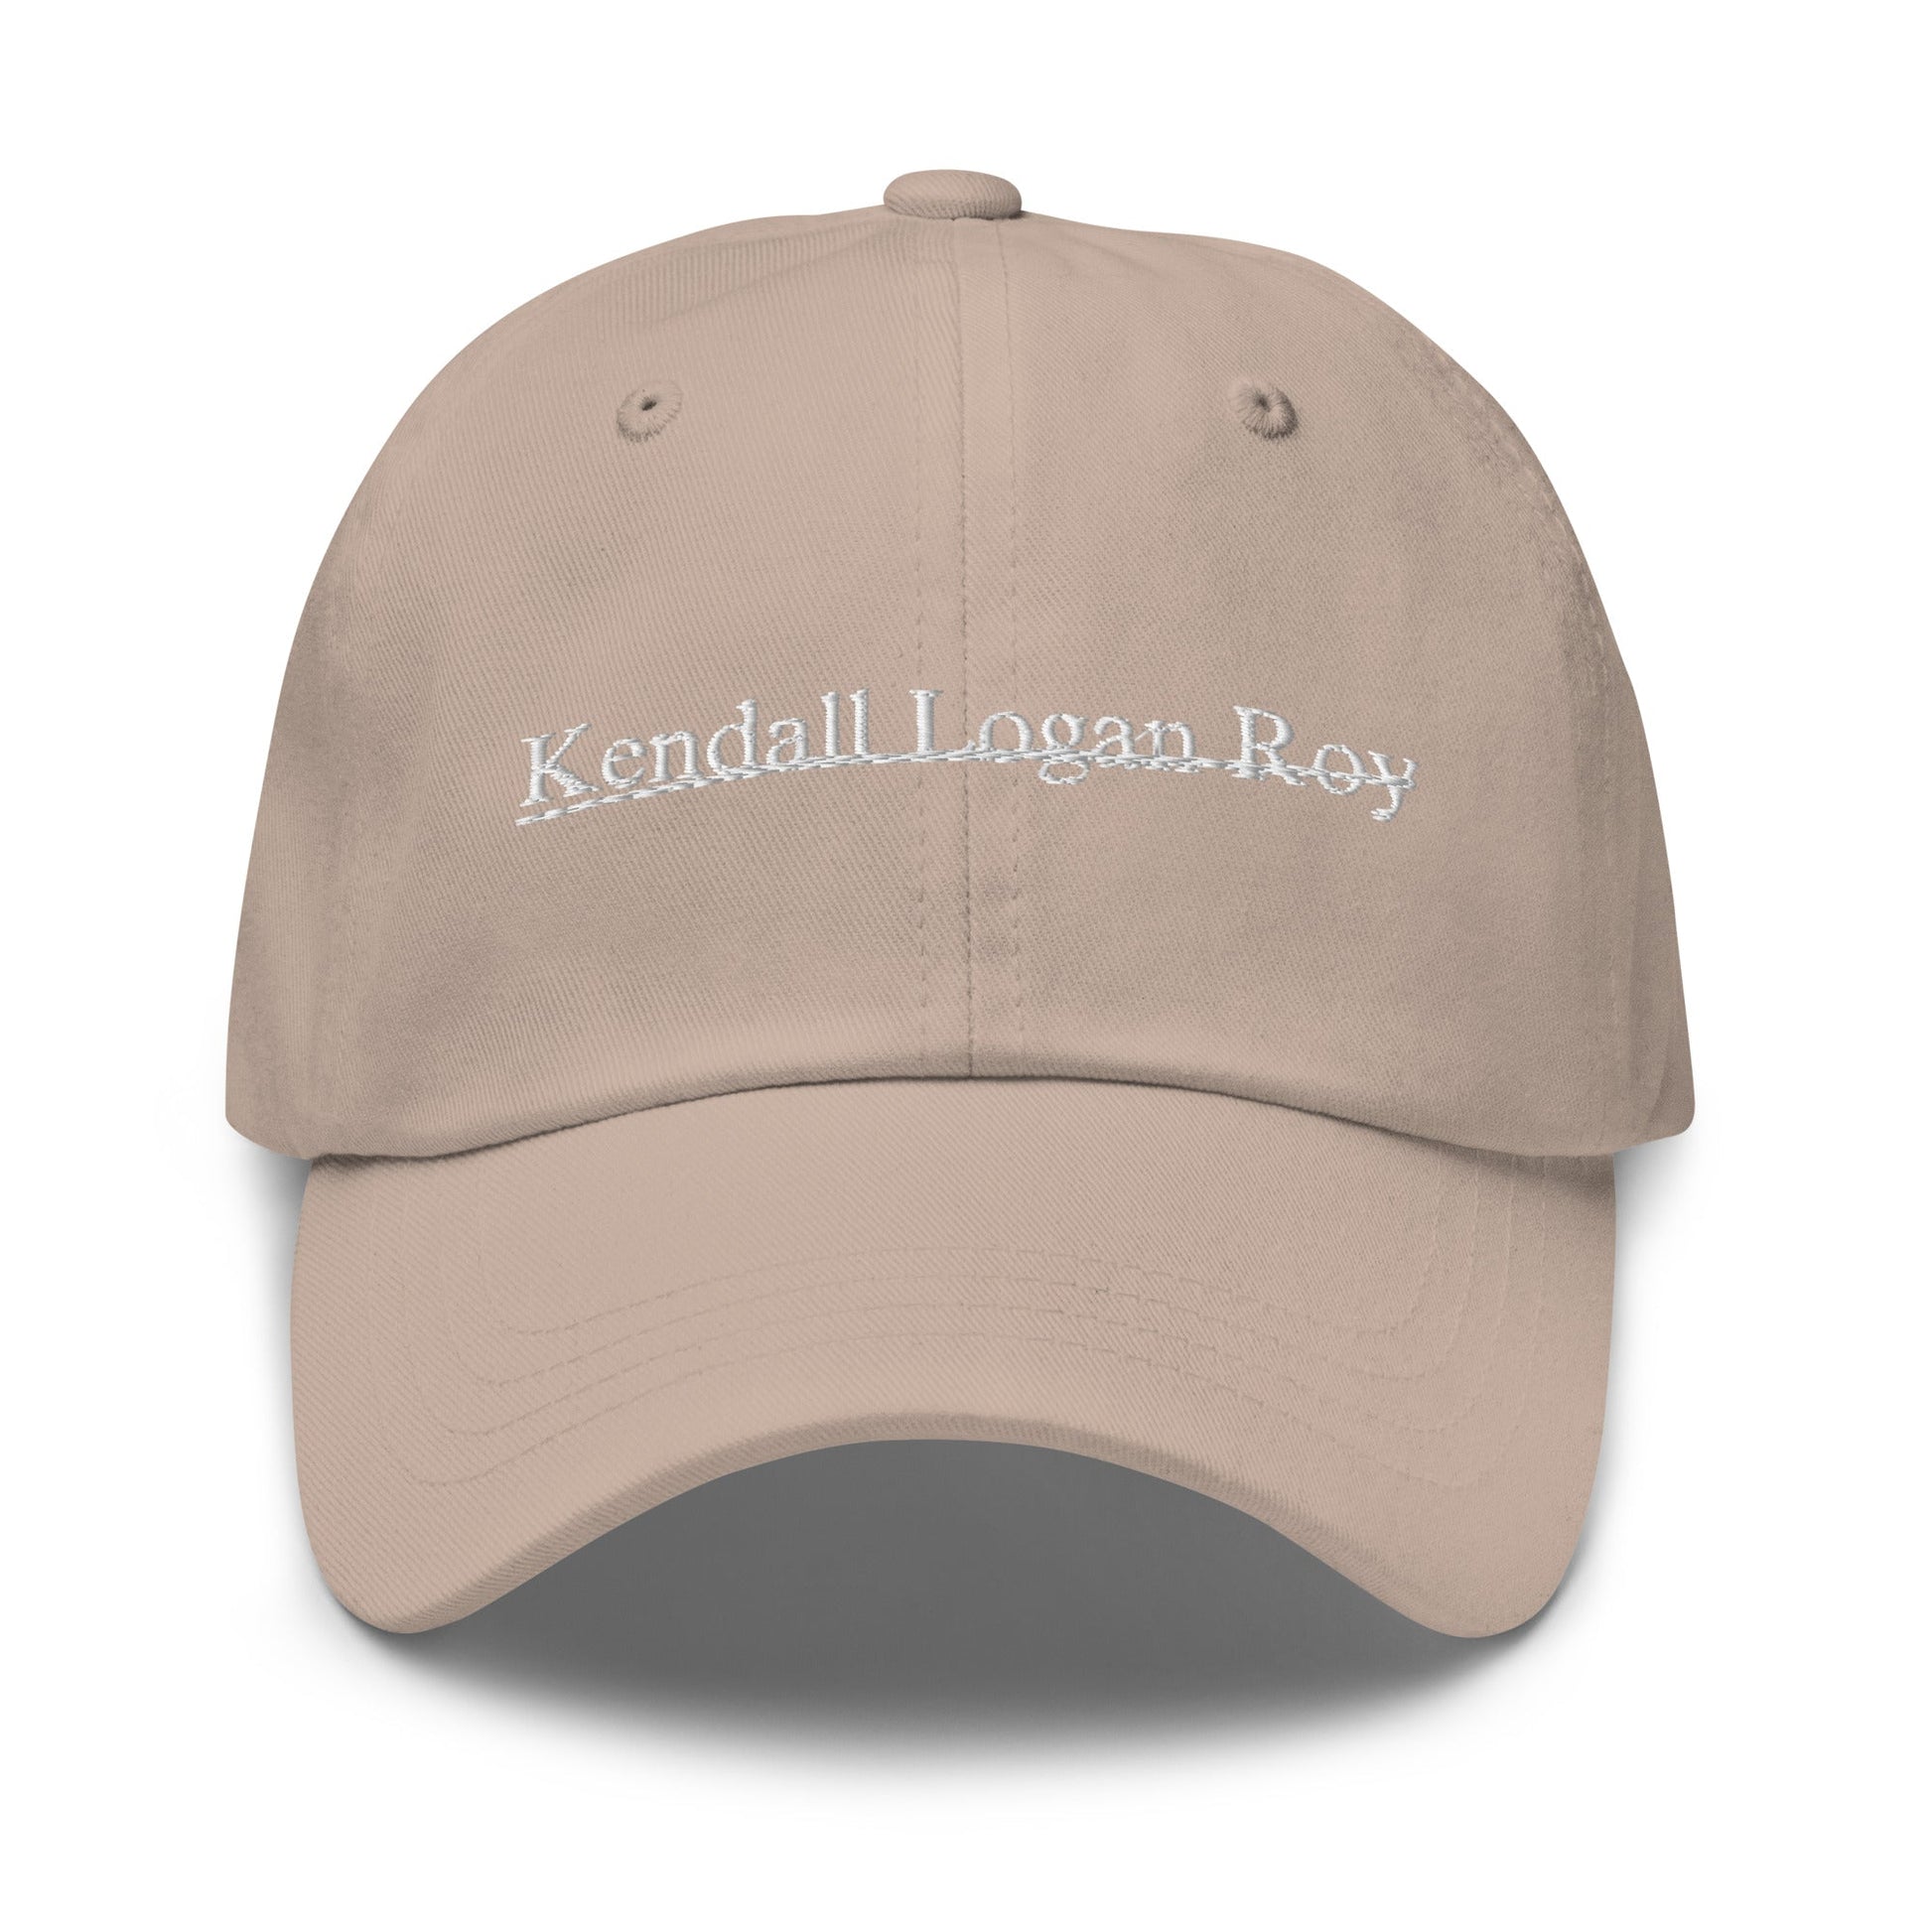 Kendall Roy Hat - Crossed Out Signature - Evilwater Originals